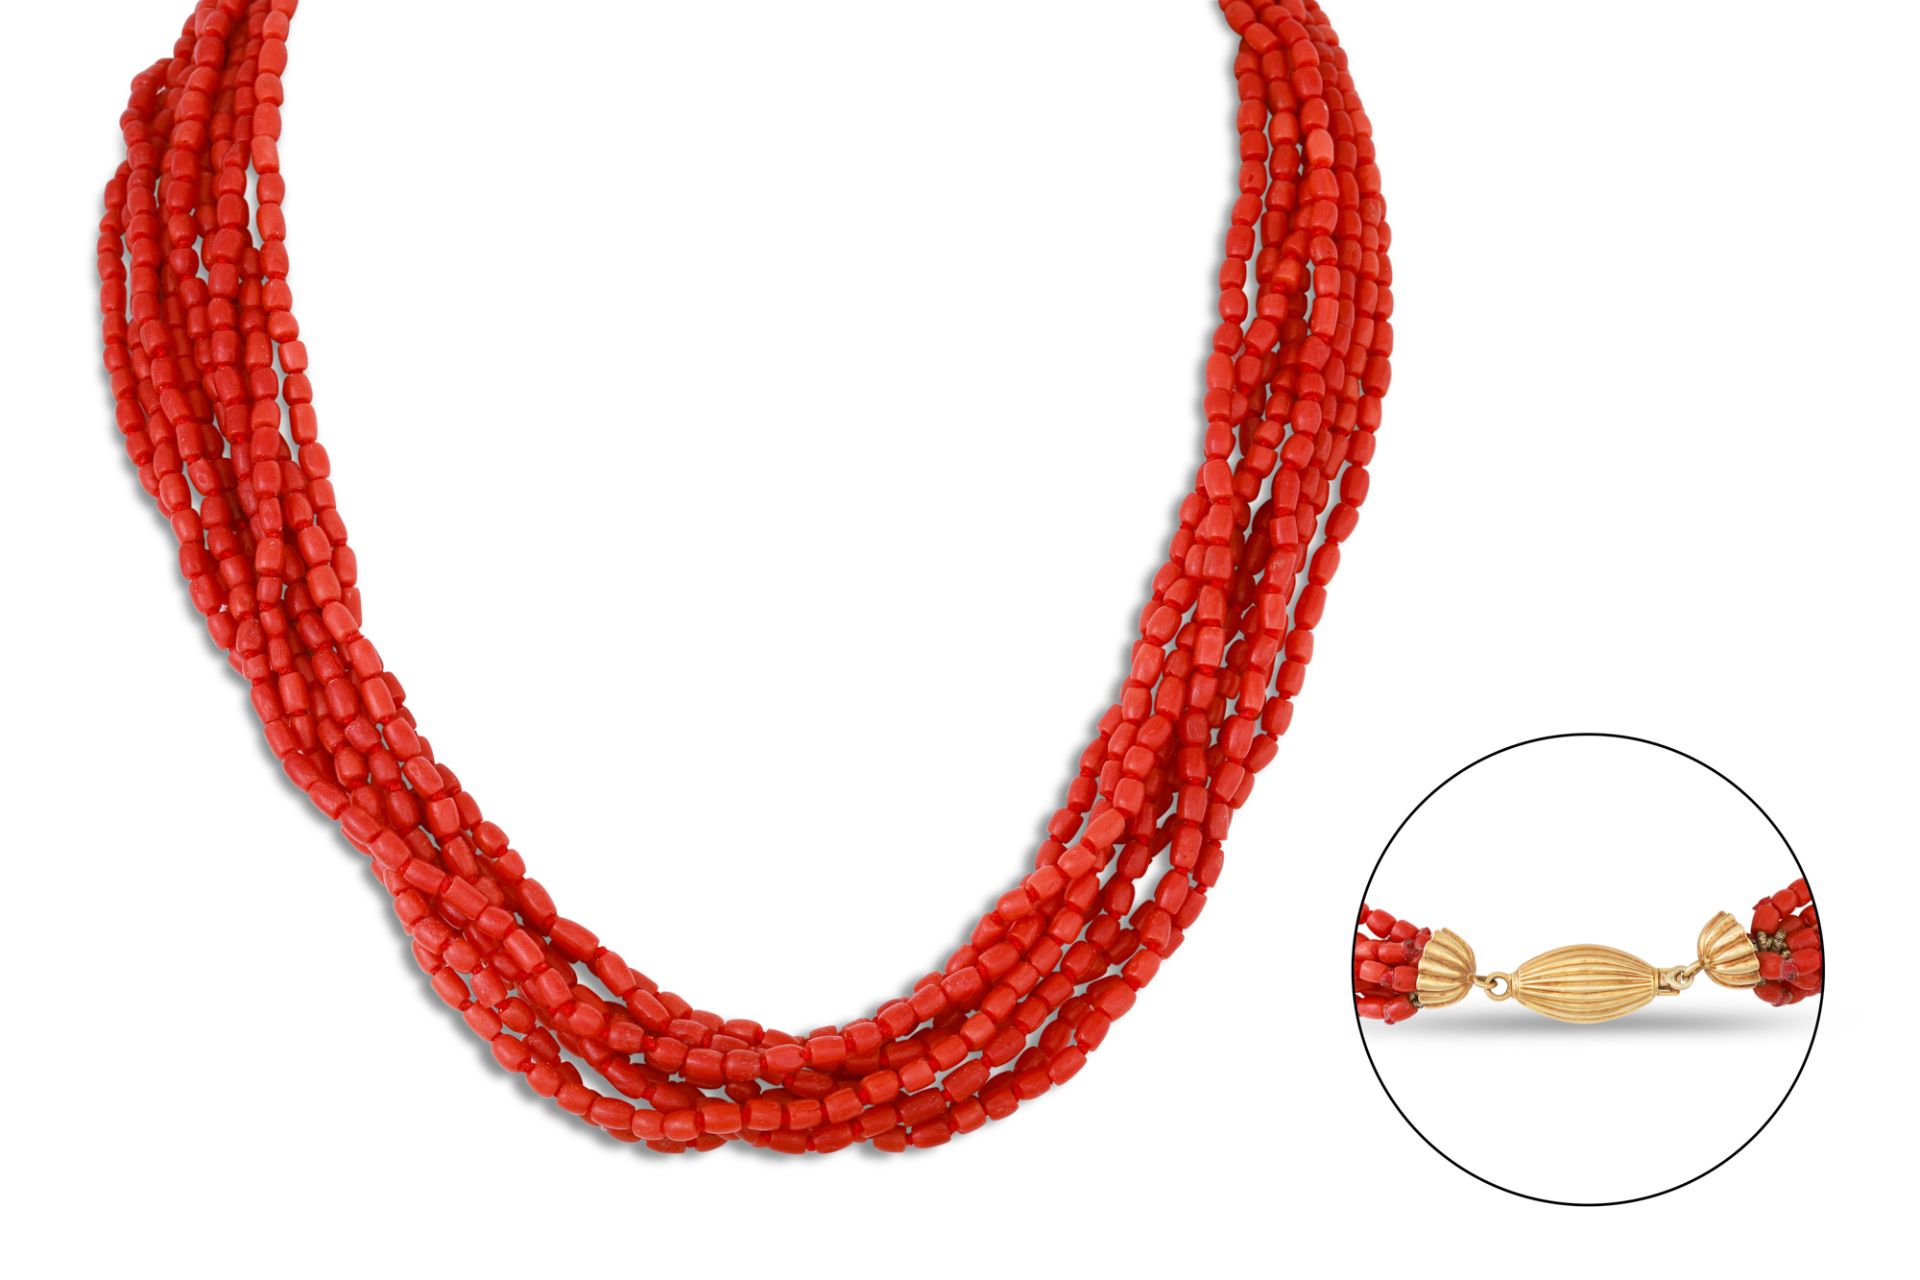 A MULTI-STRANDED BEADED CORAL NECKLACE, to a 18ct gold barrel clasp